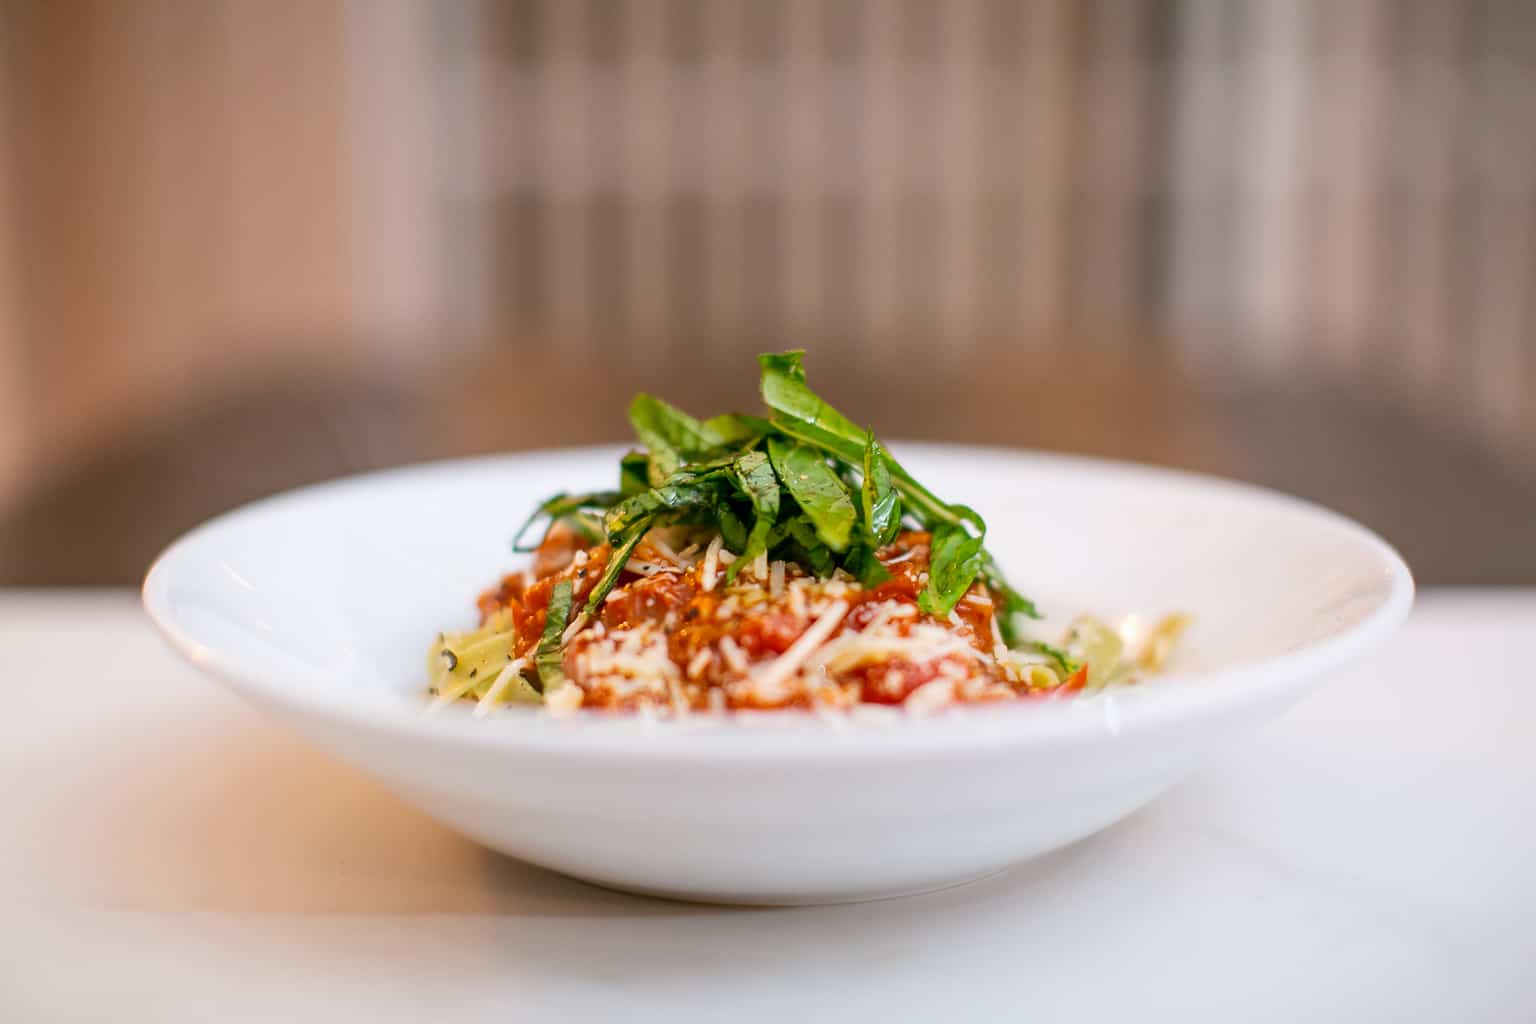 Pasta topped with spicy tomato sauce and herbs served in a white bowl placed on a white surface